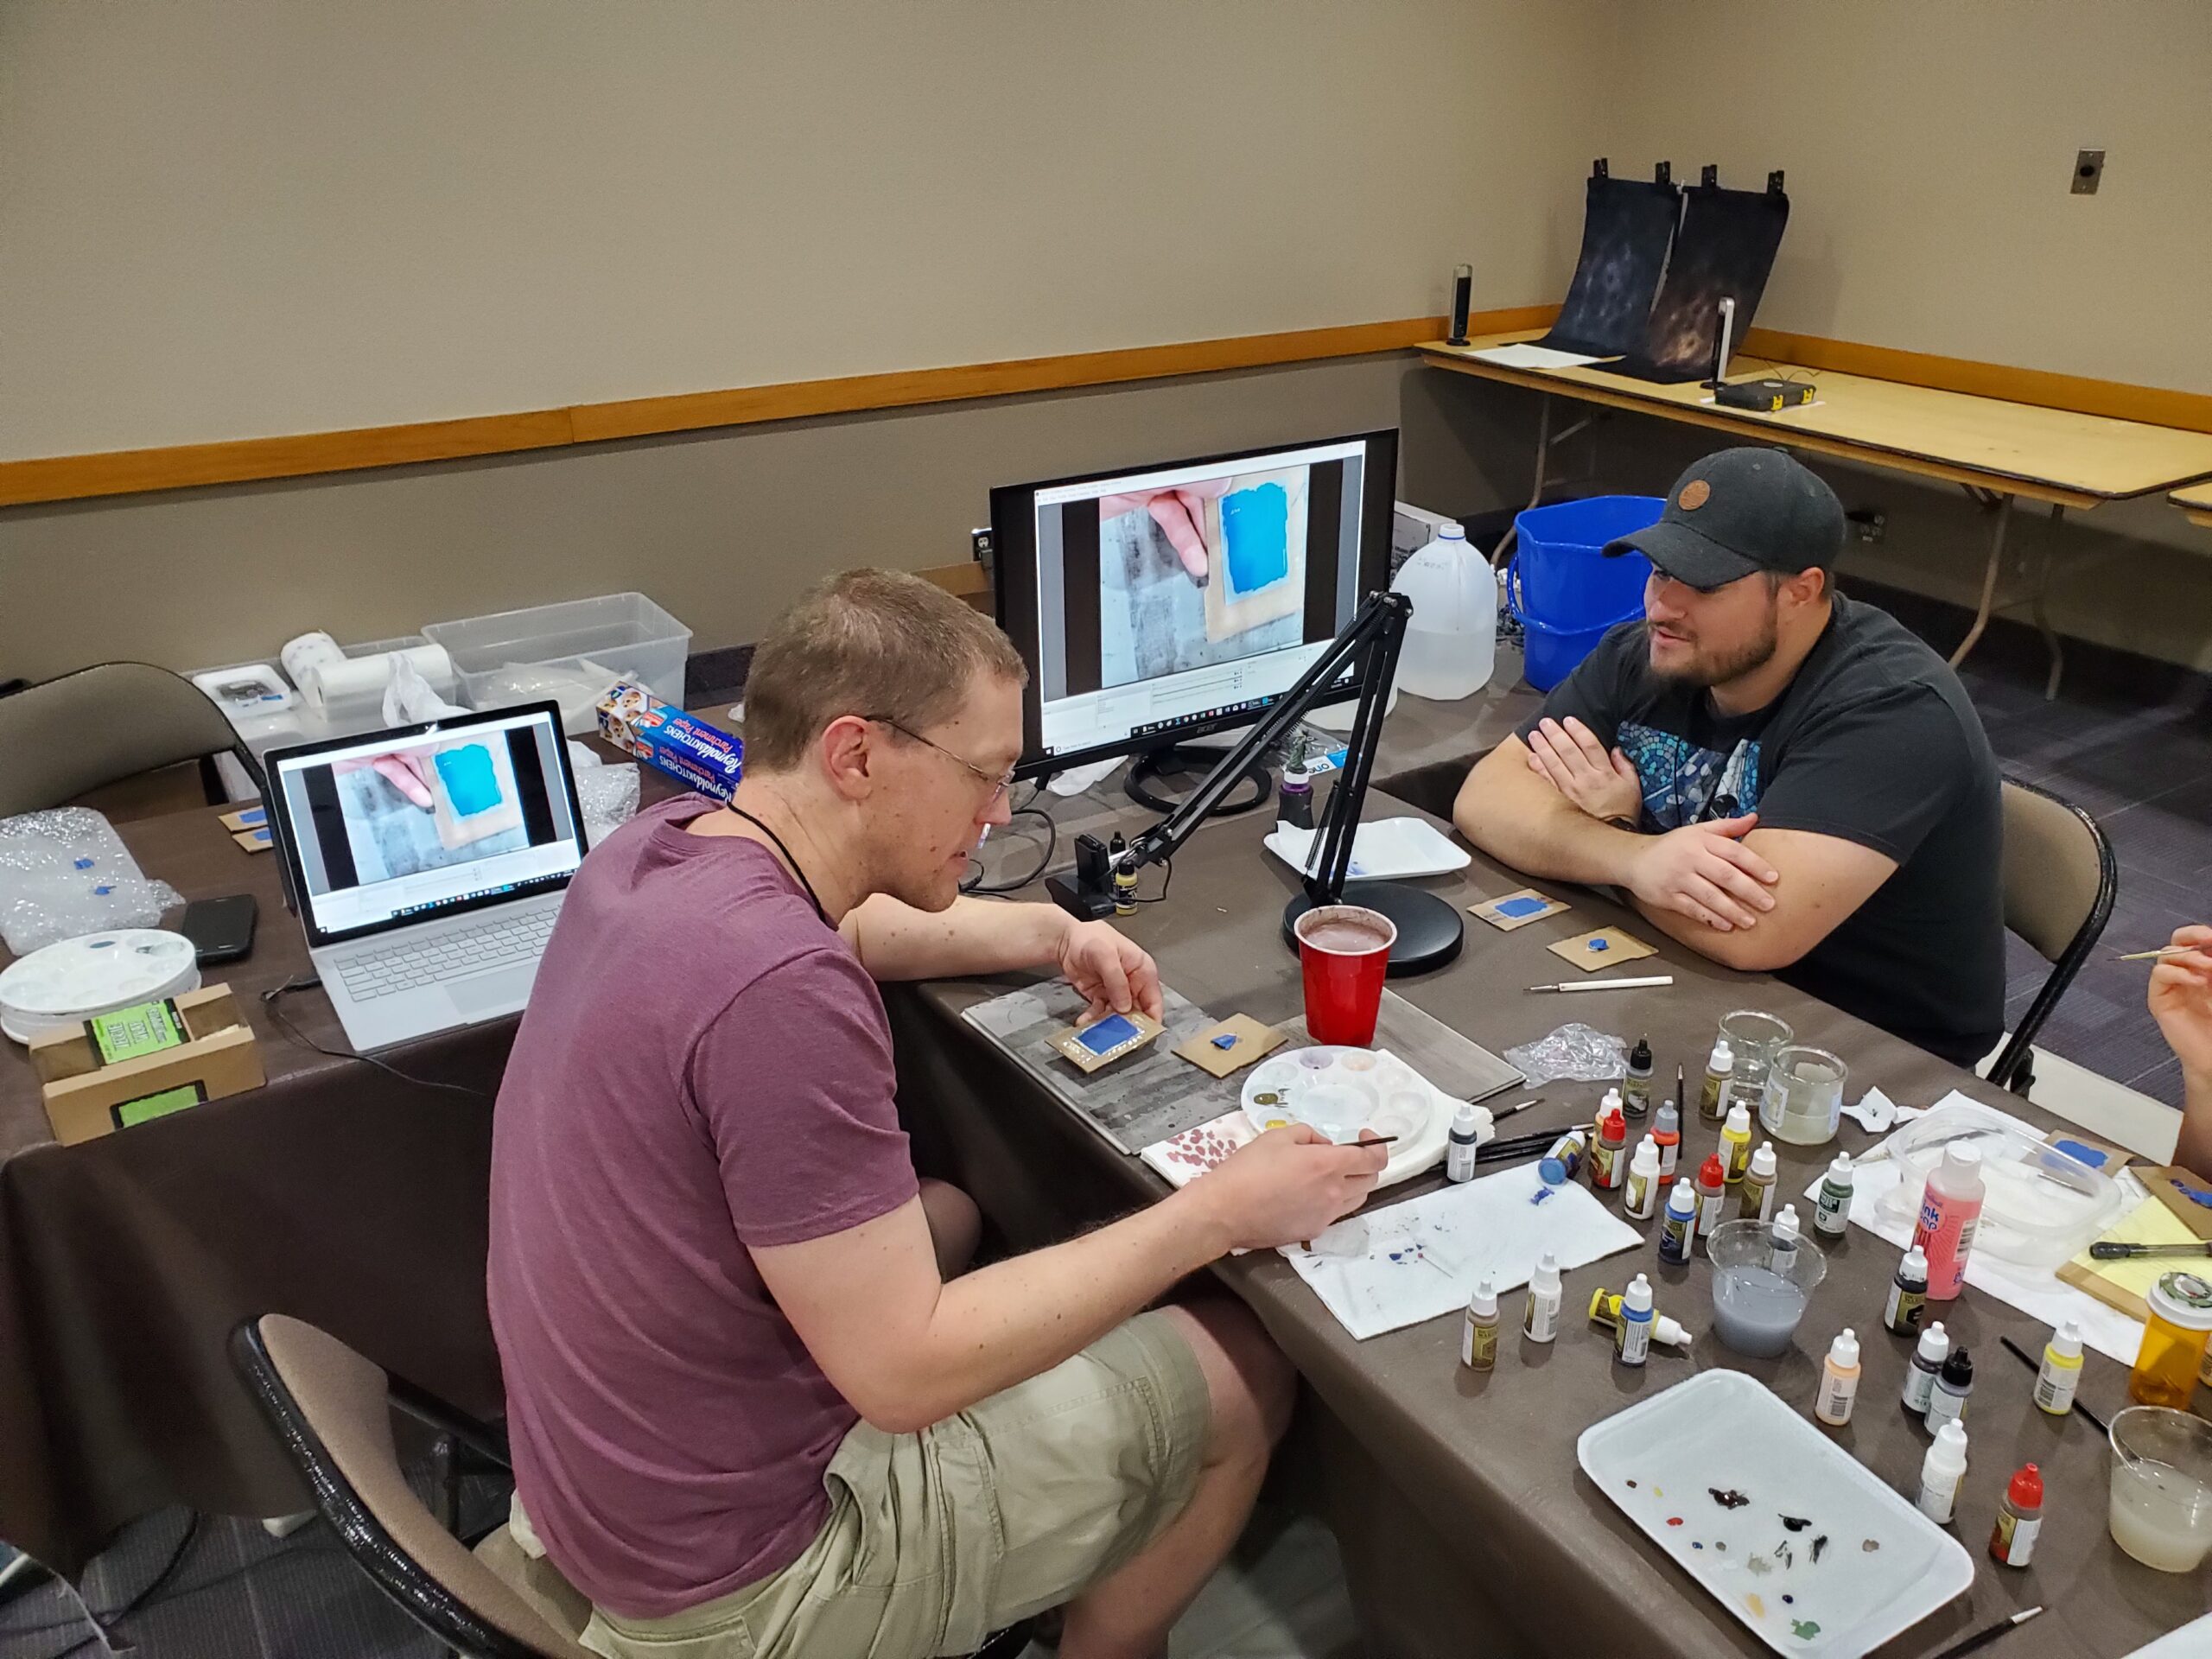 A photo showing the paint station at Arizona Game Fair 2019